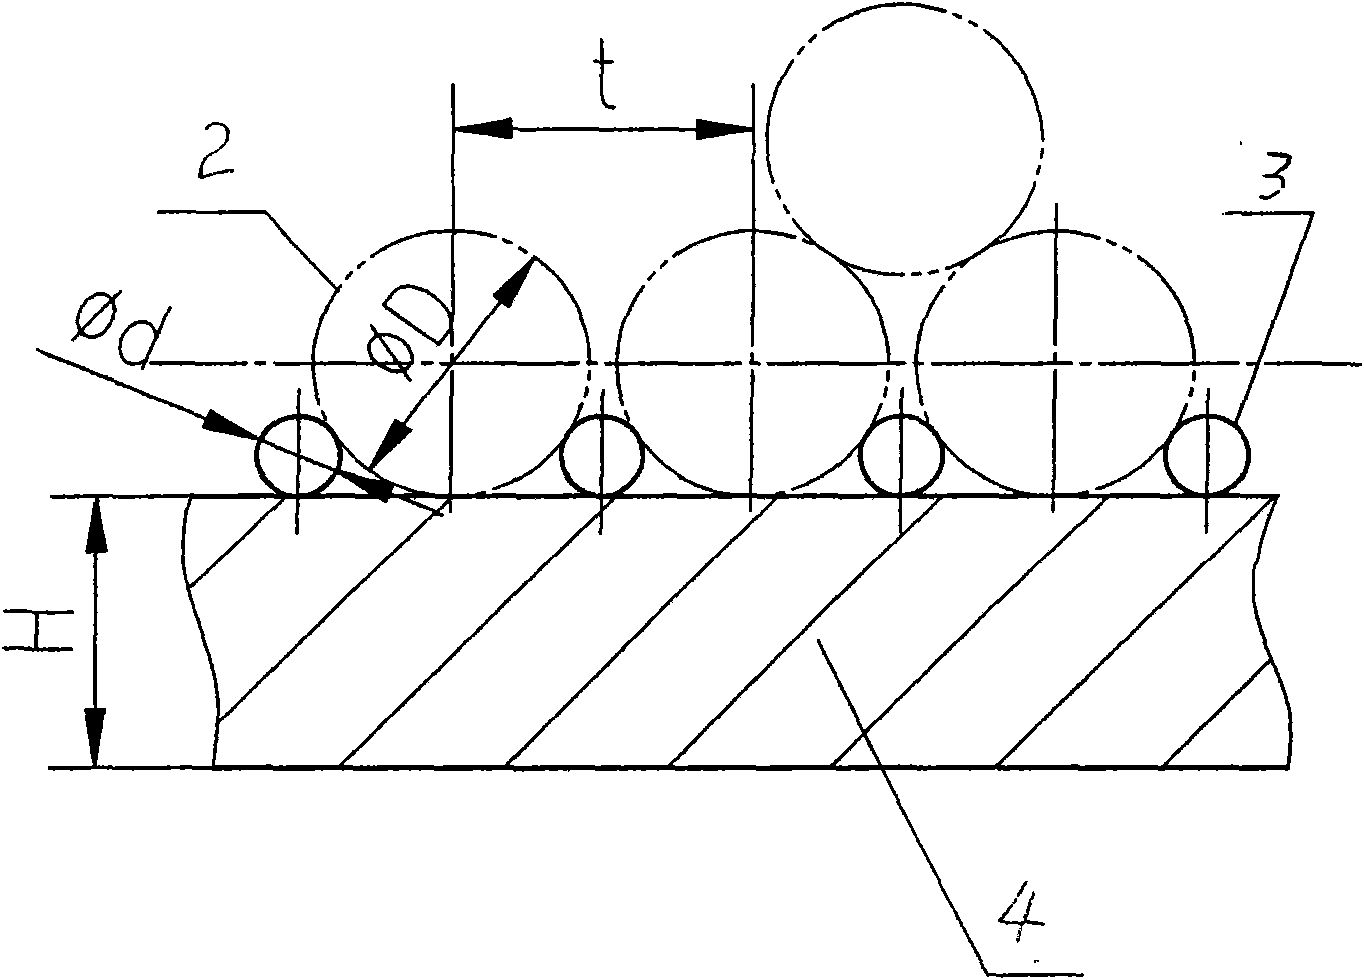 Drum with fold line grooves